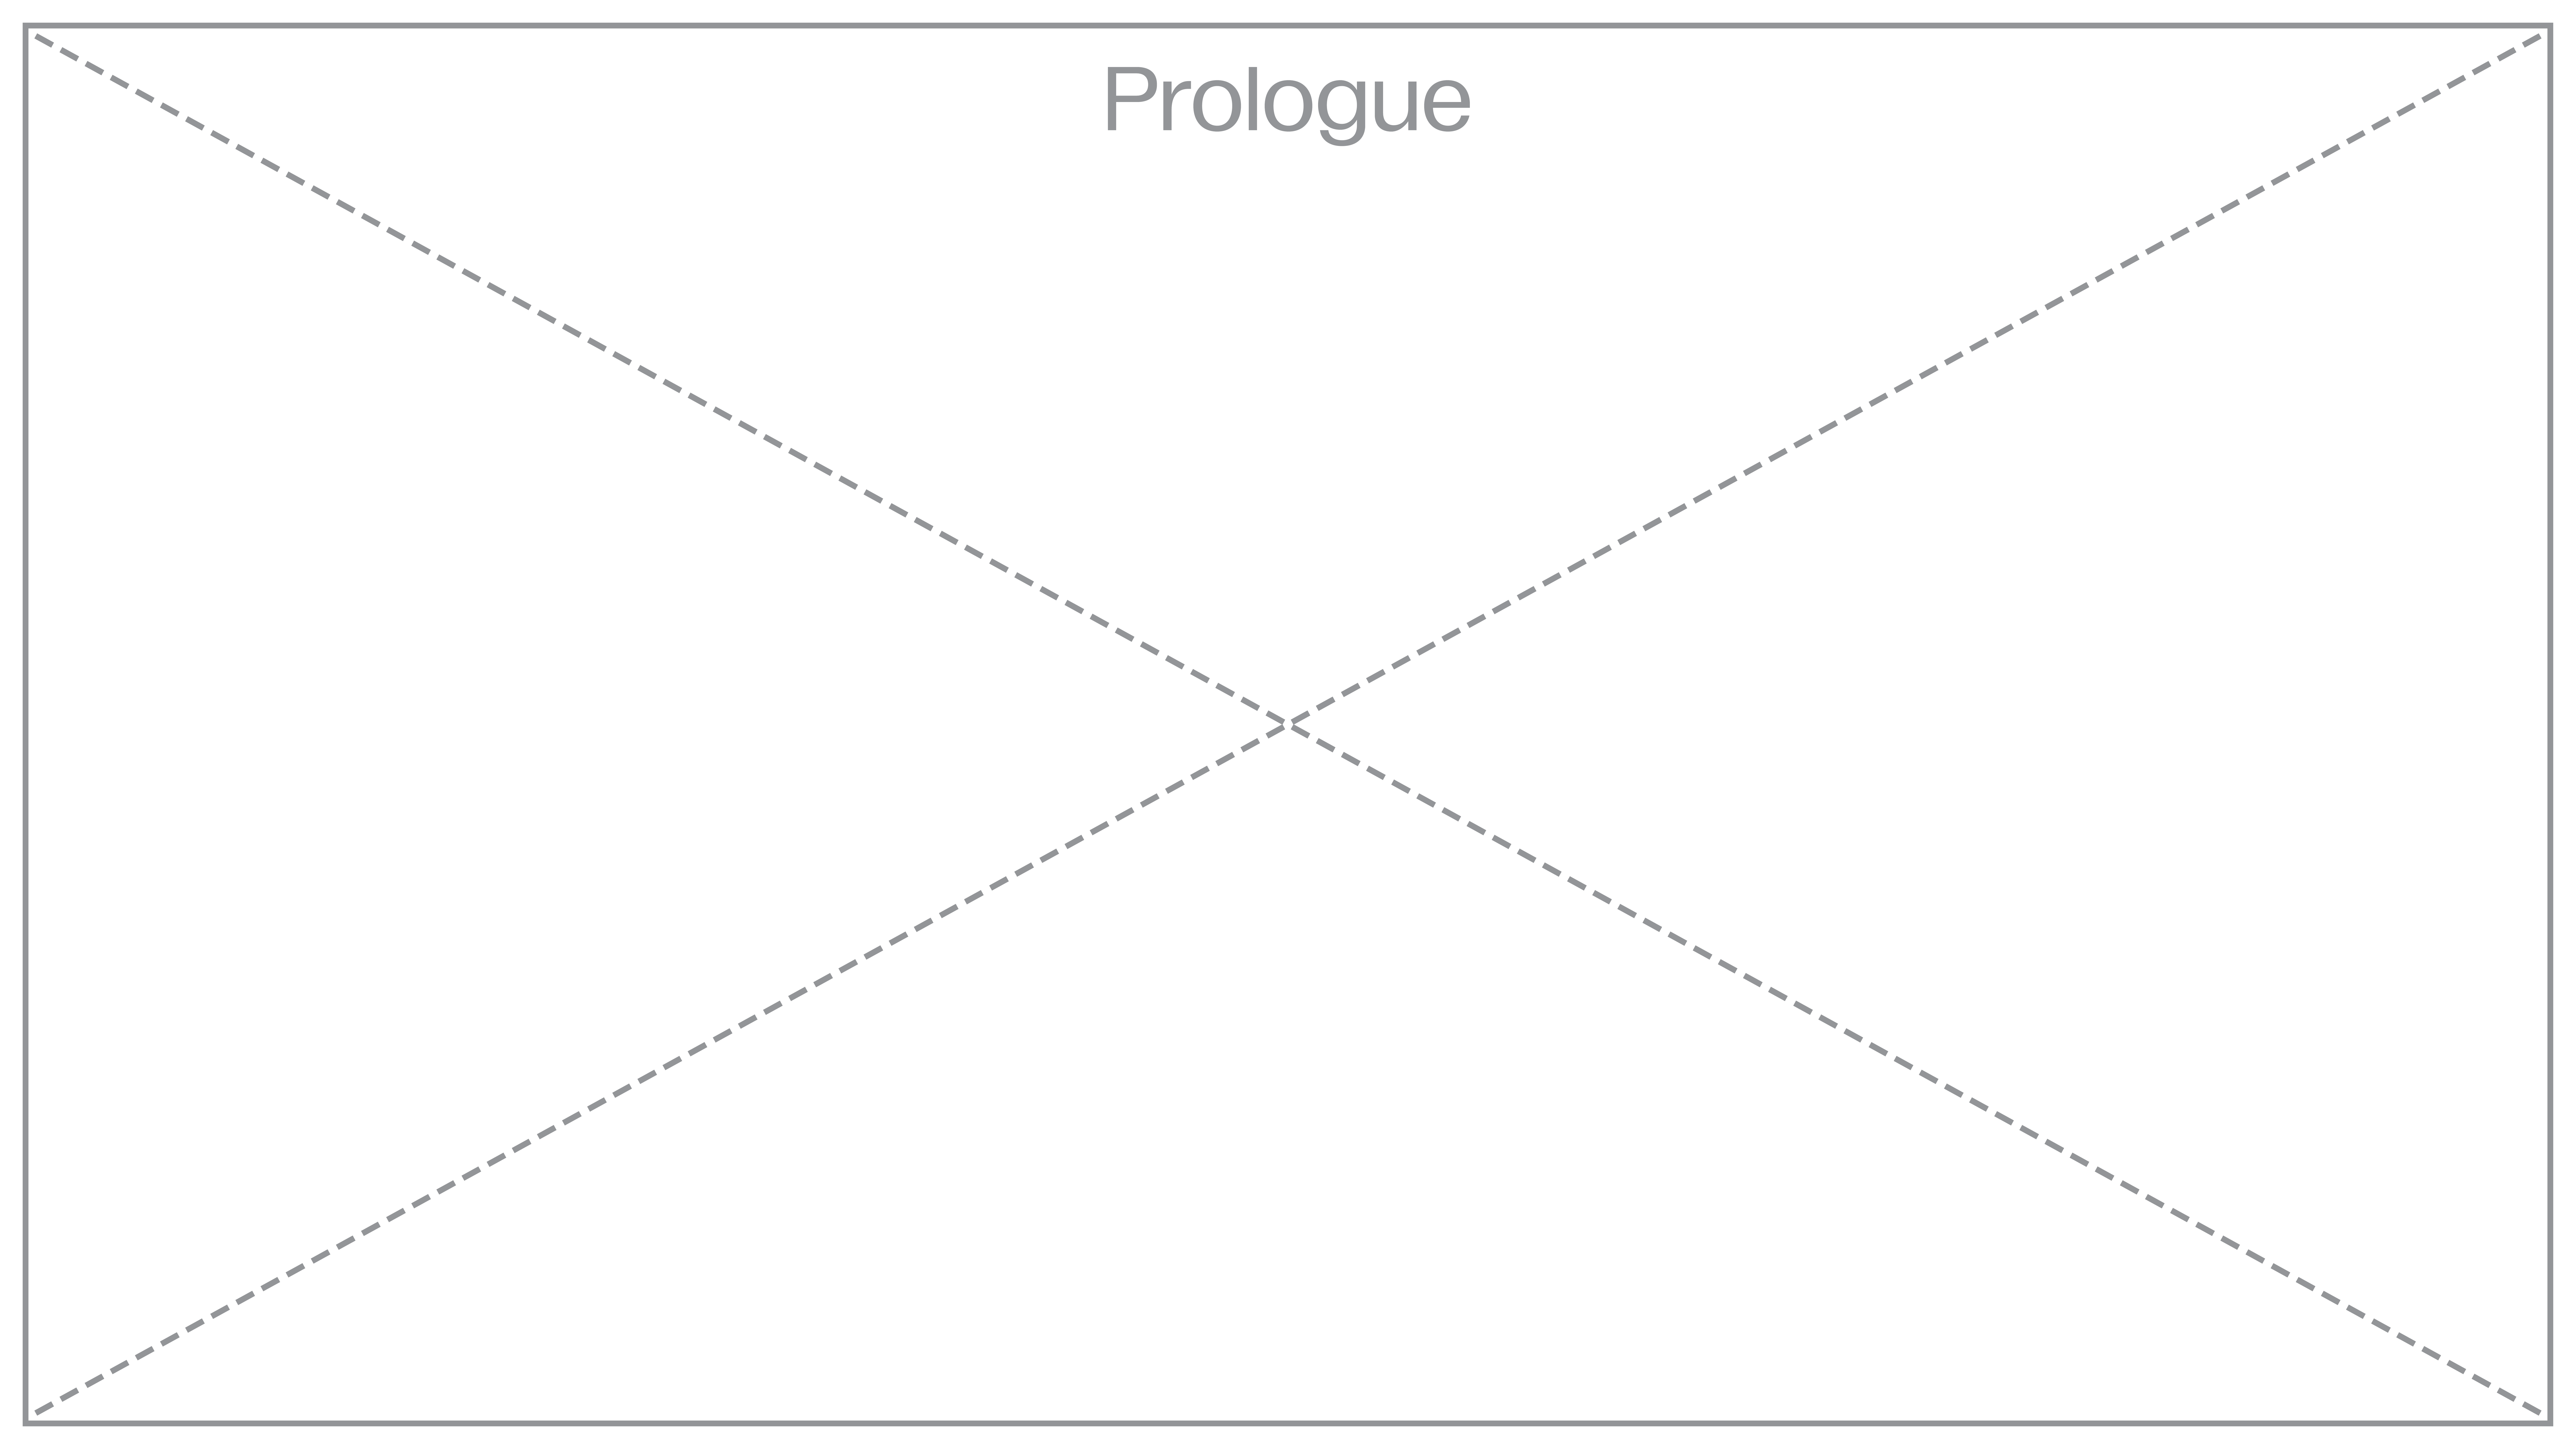 The title image of the project: a white rectangle crossed diagonally with dashed gray lines. At the bottom, the inscription is in gray "Prologue"